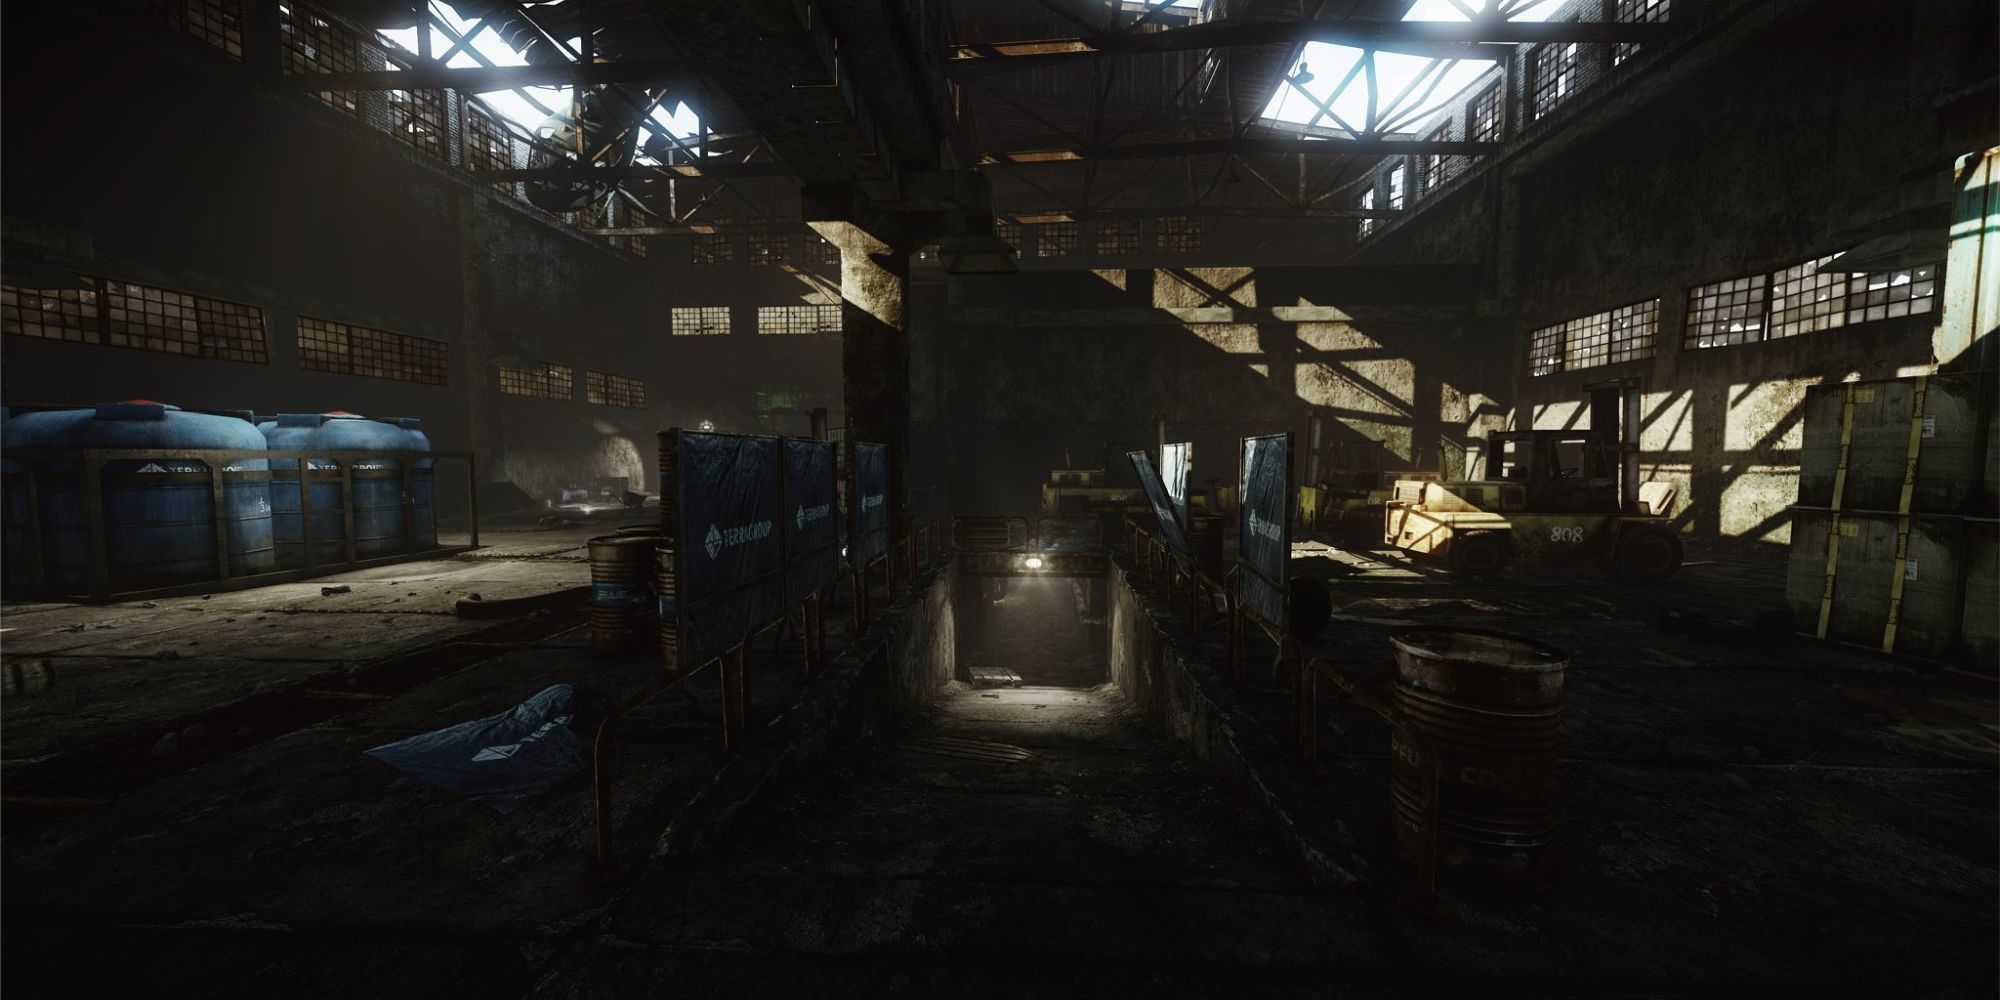 escape from tarkov inside of dark factory area with industrial equipment everywhere